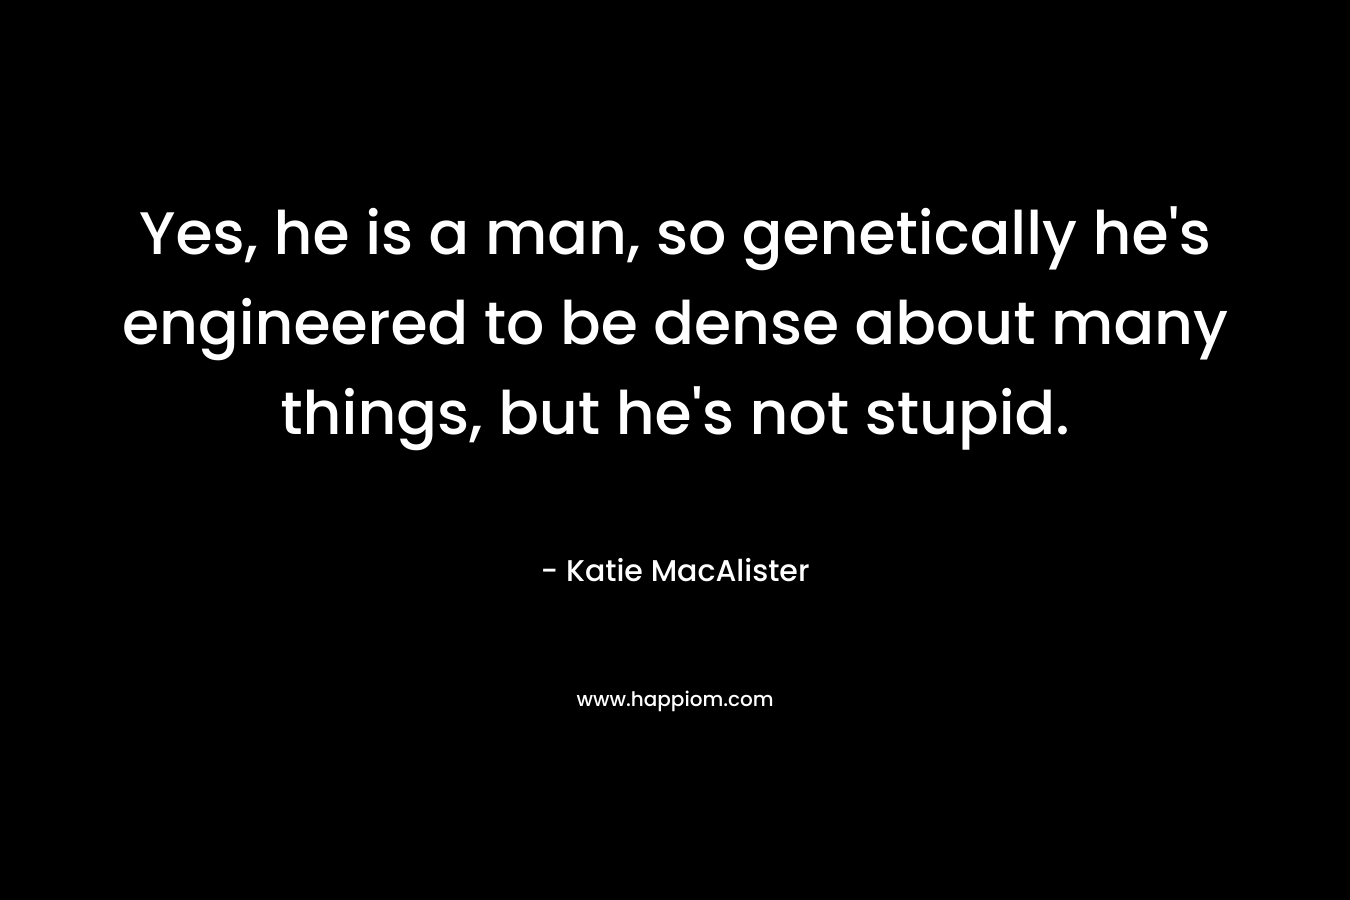 Yes, he is a man, so genetically he's engineered to be dense about many things, but he's not stupid. 